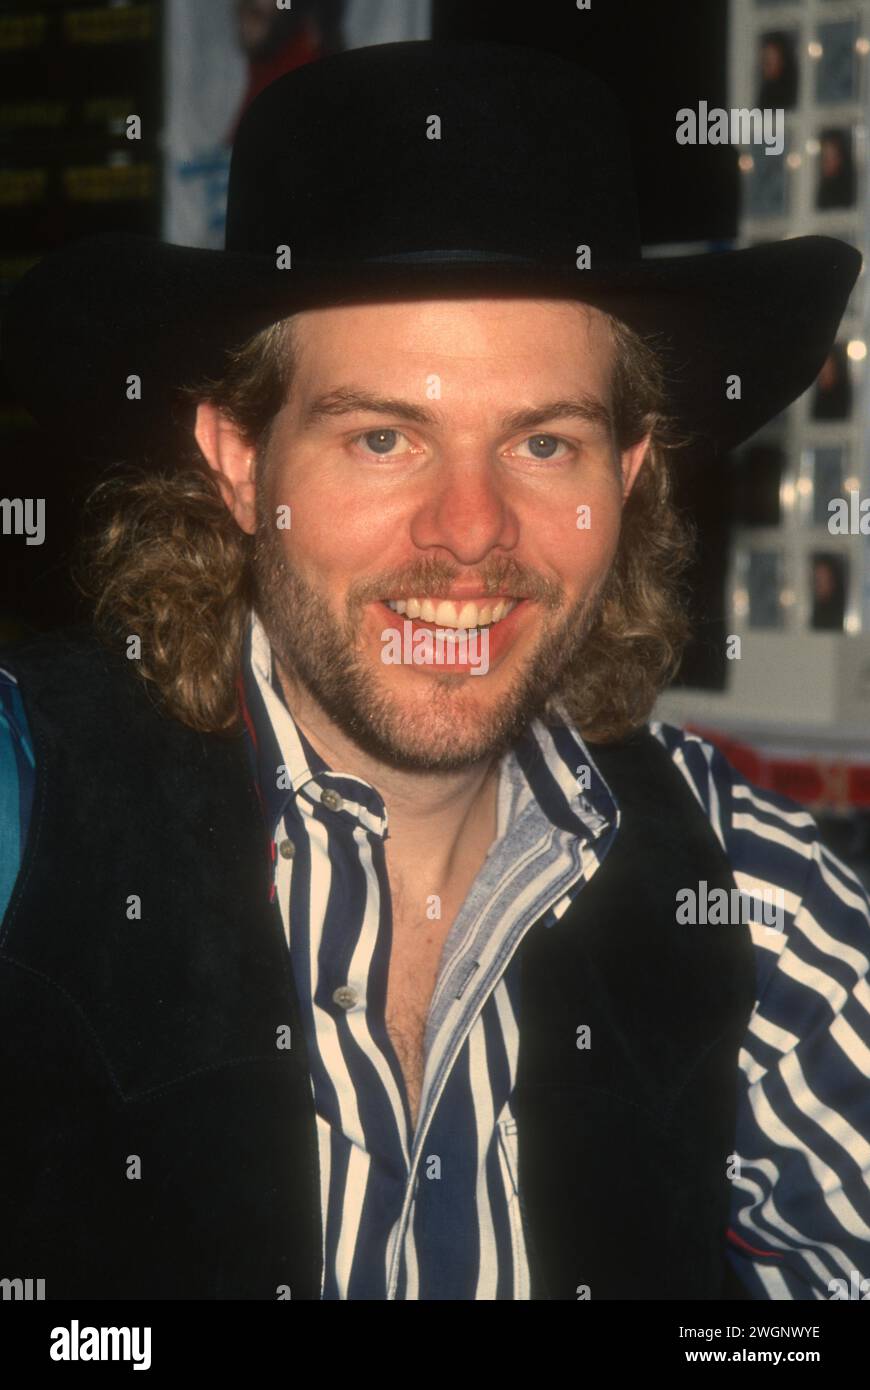 File Photo Toby Keith Has Passed Away Toby Keith 1994 Photo By